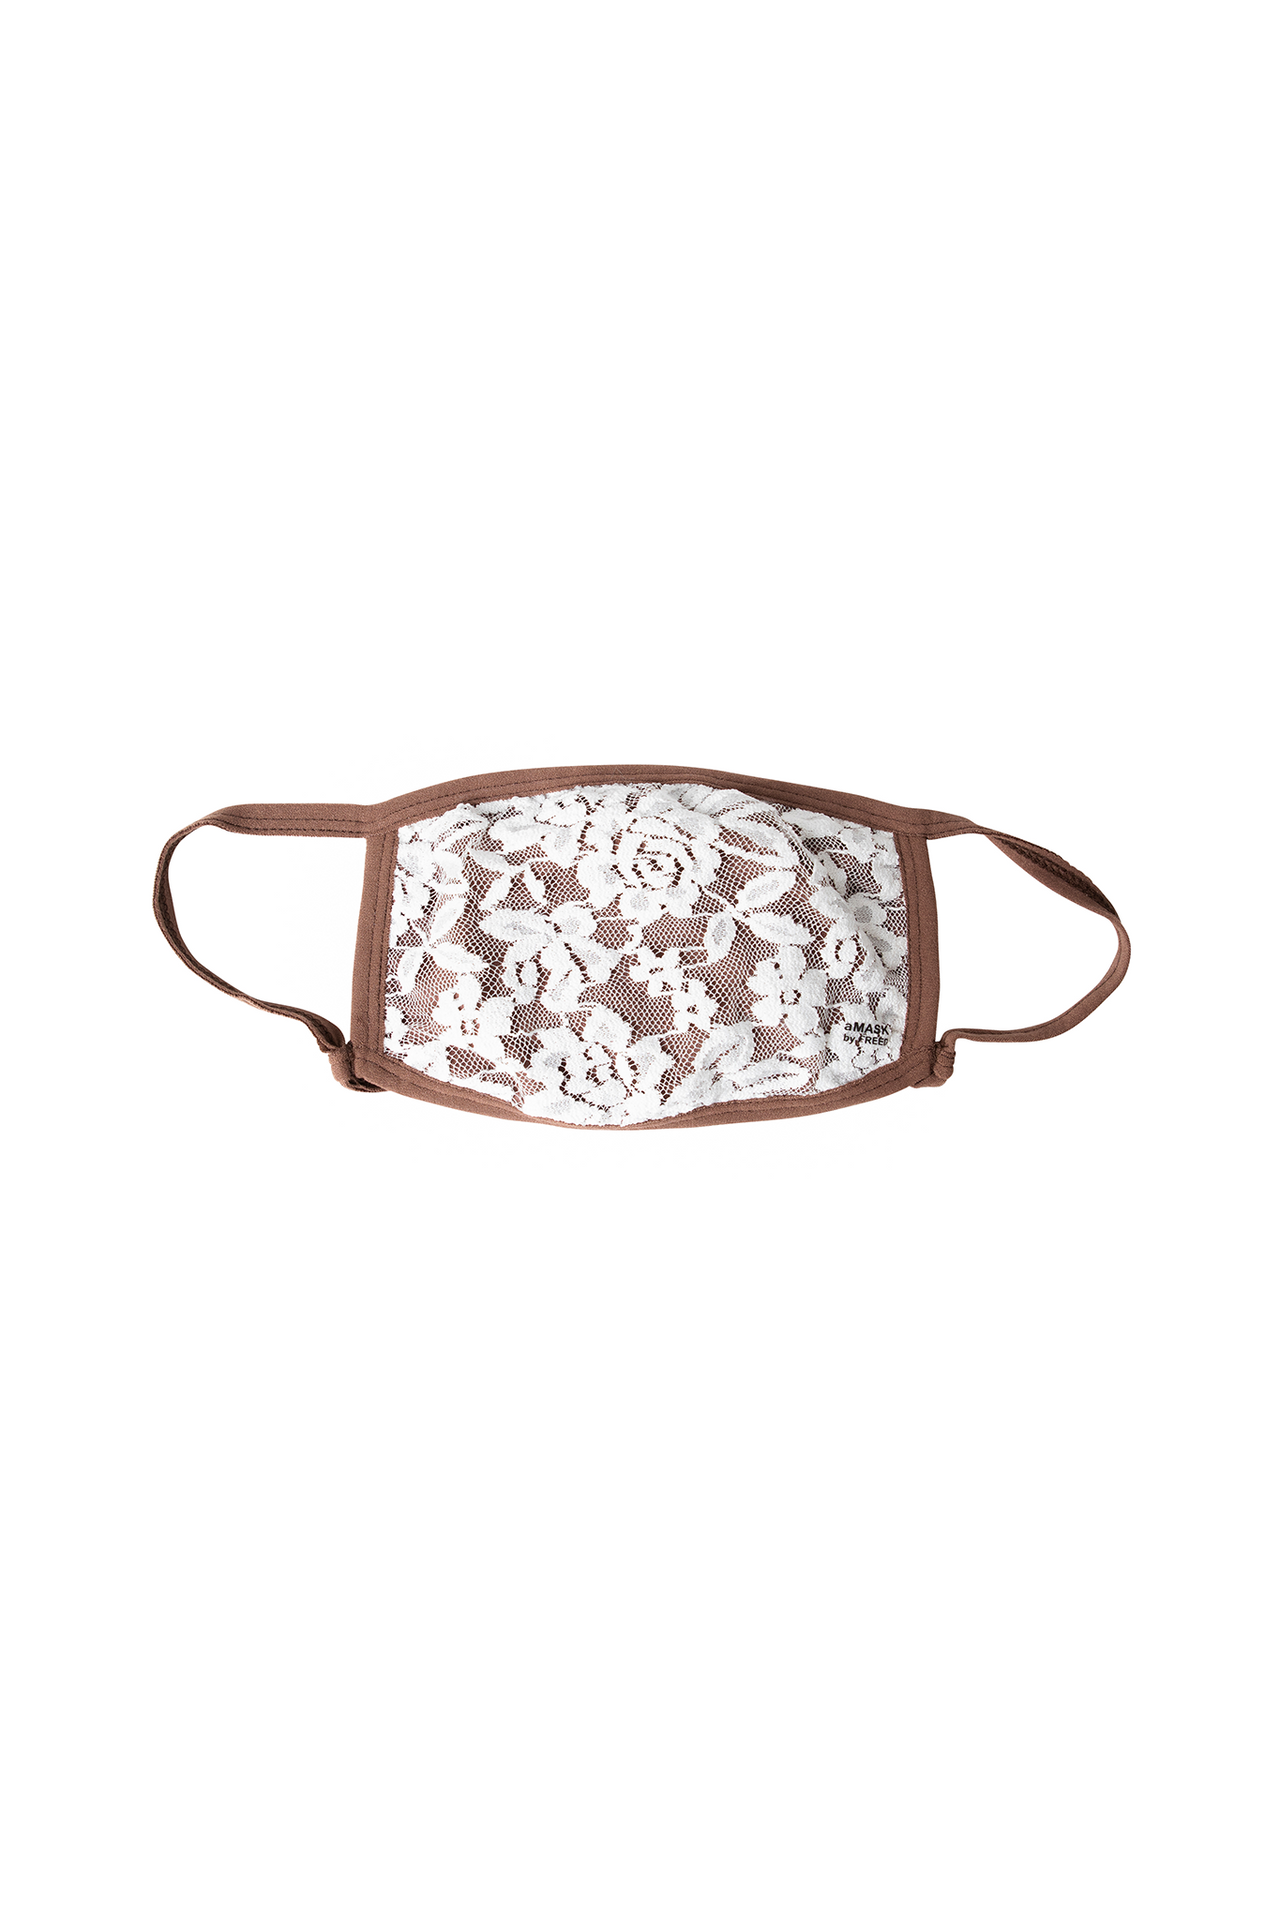 Adult lace and cotton face mask.